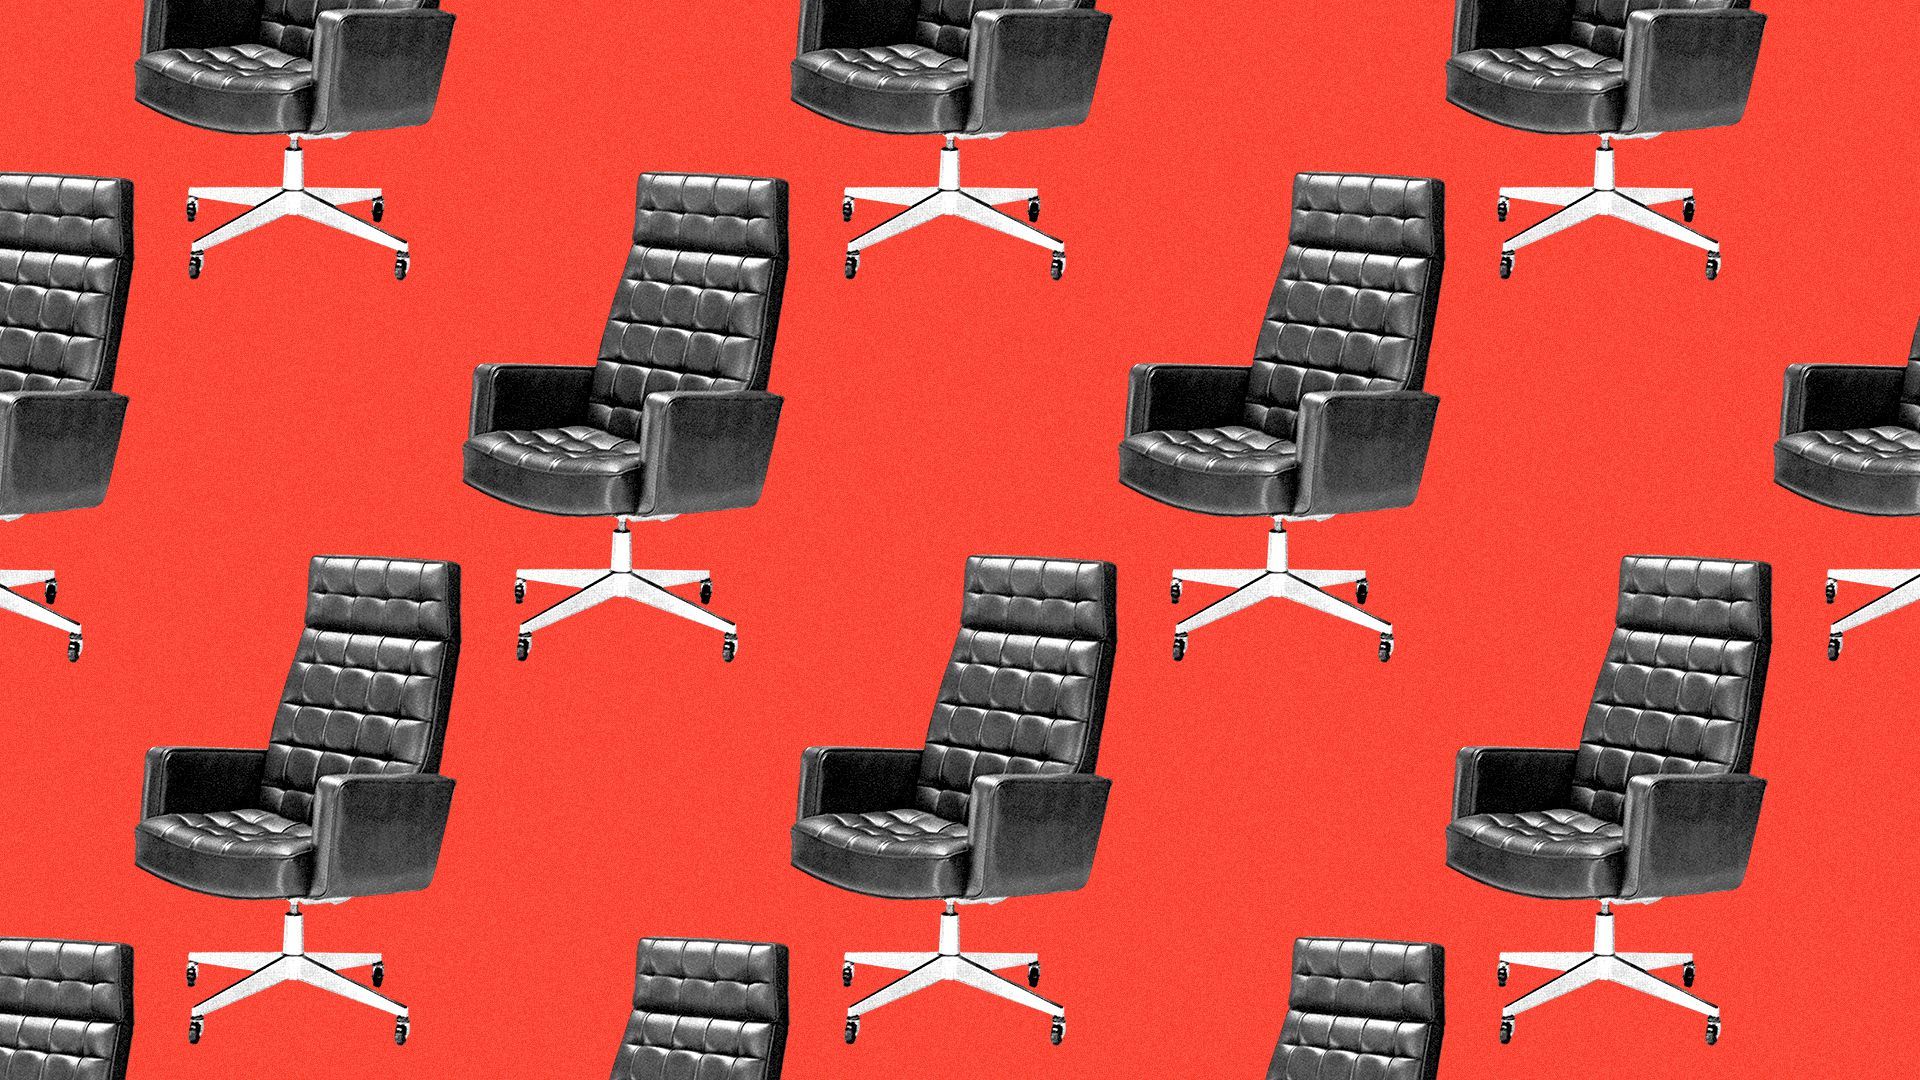 Illustration of a pattern of leather office chairs.